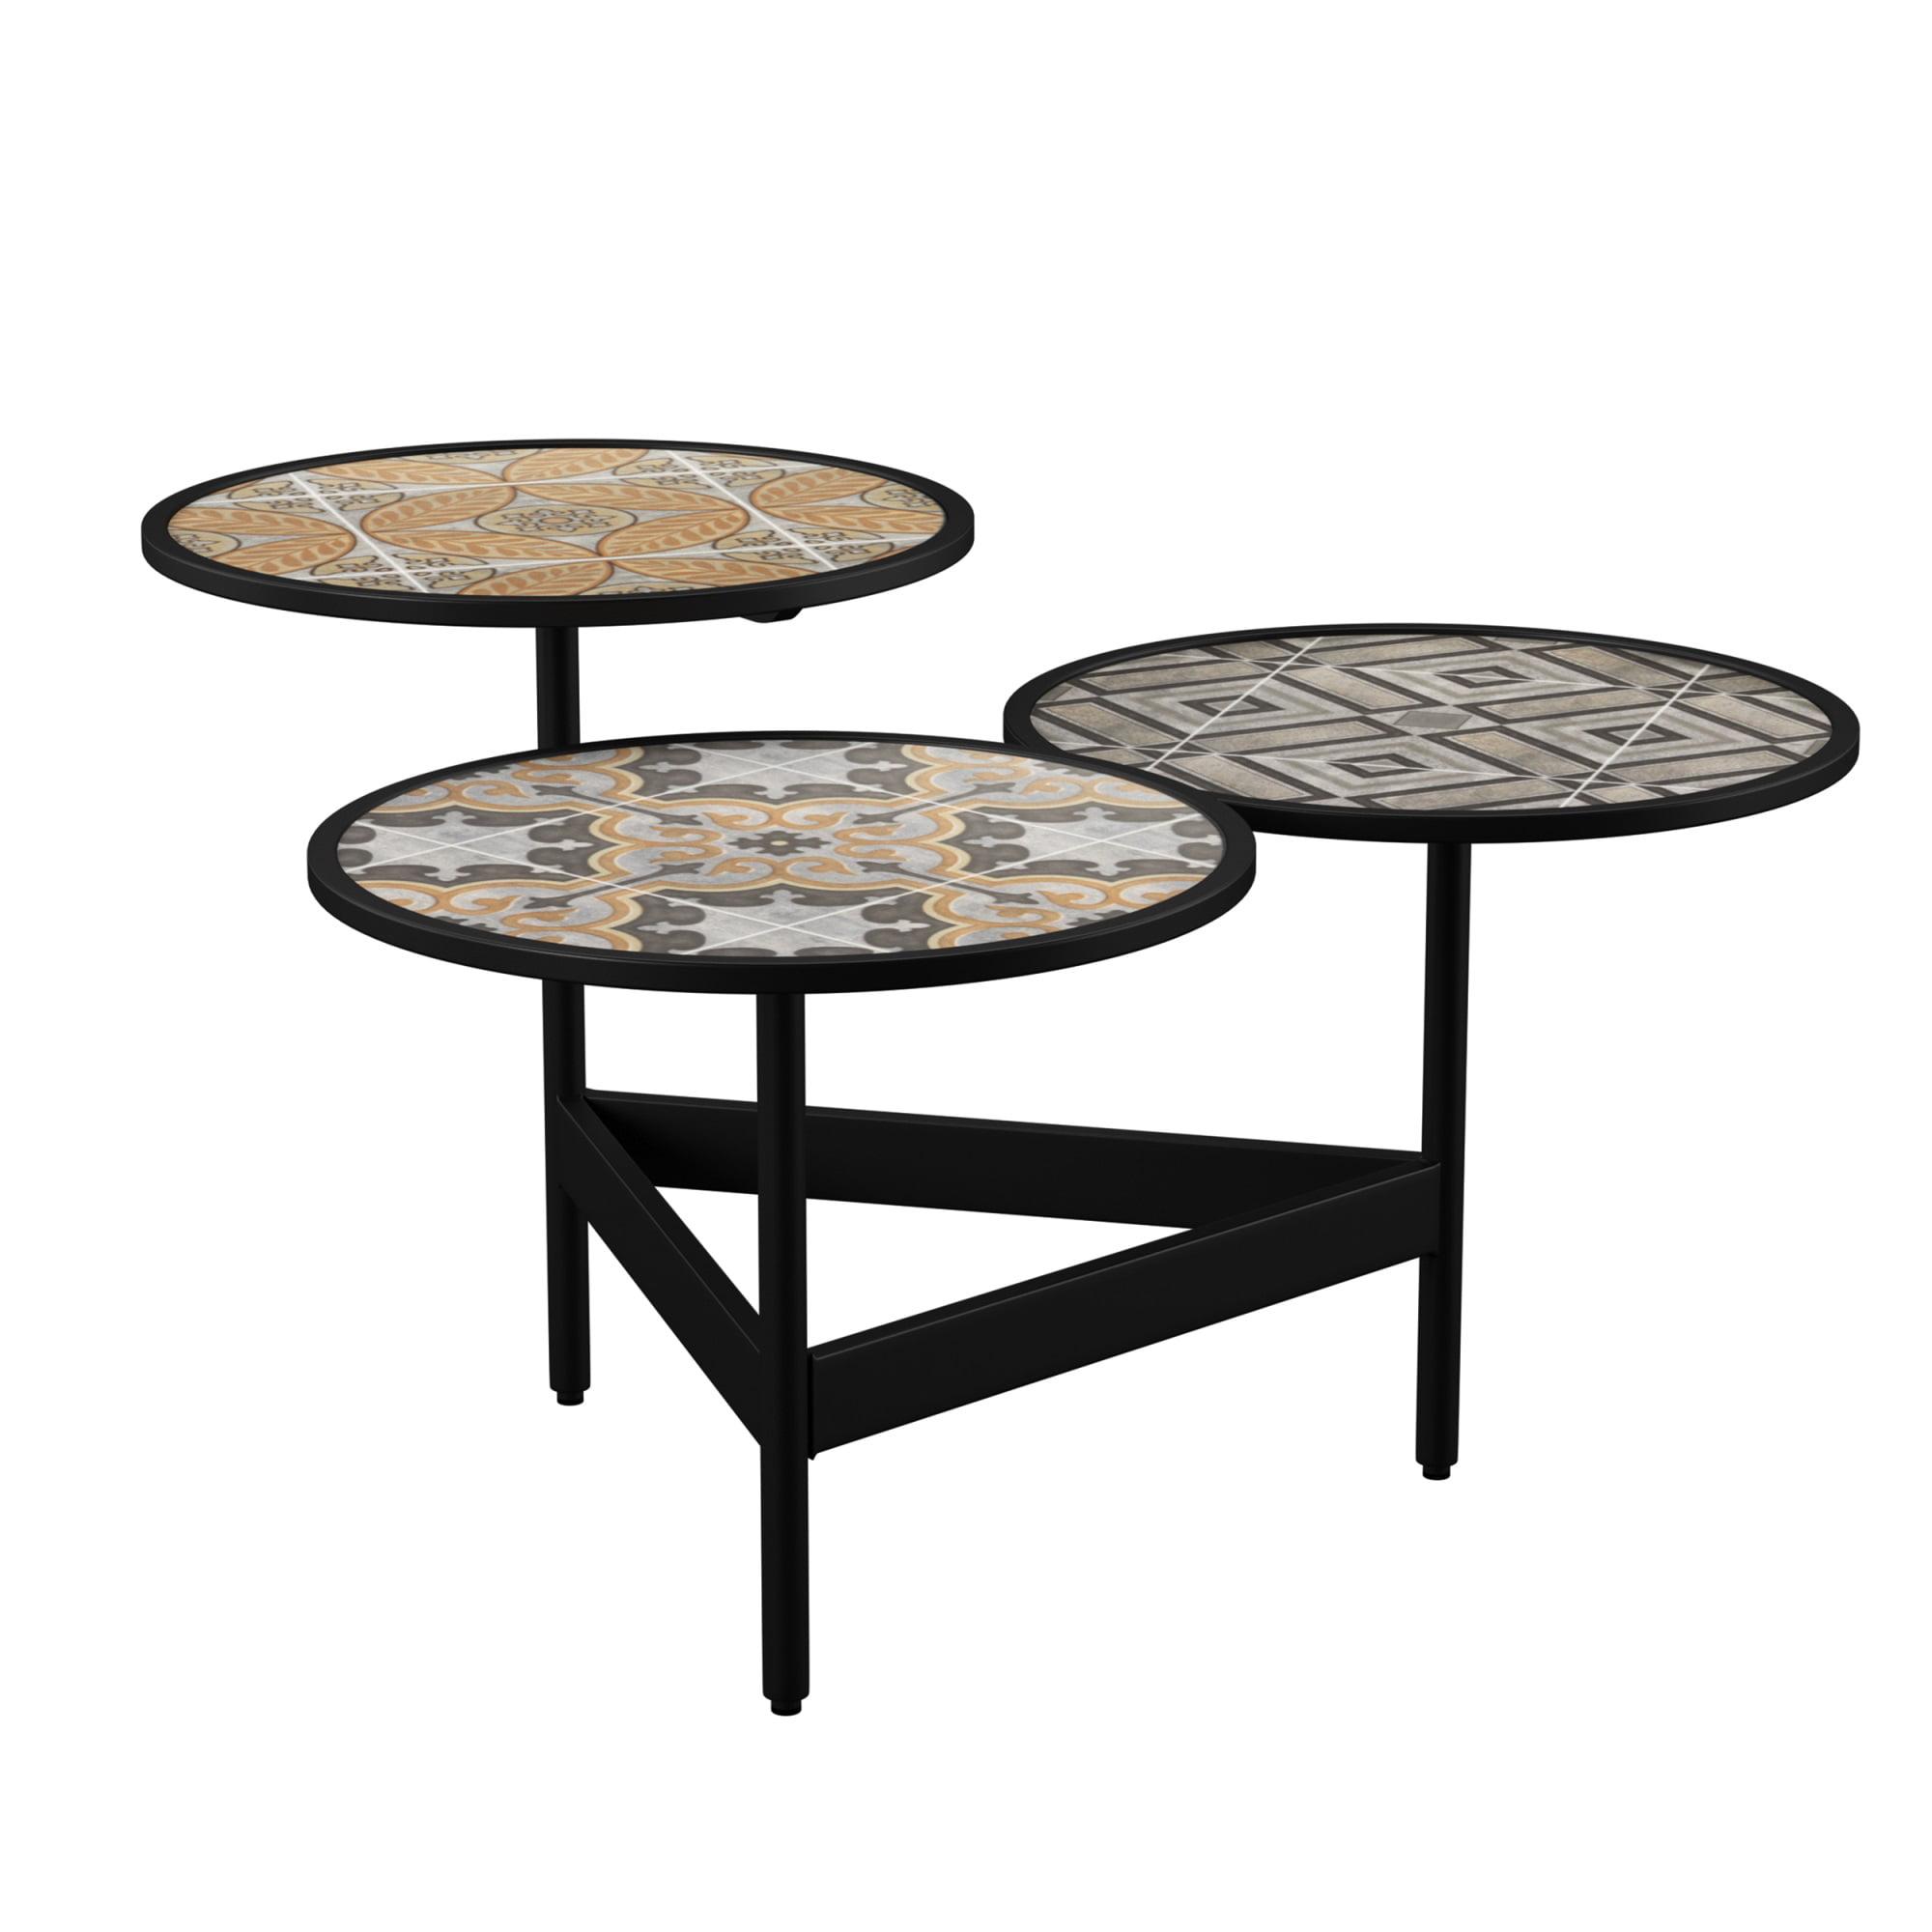 Modern Tri-Level Outdoor Cocktail Table with Multi-Color Tile